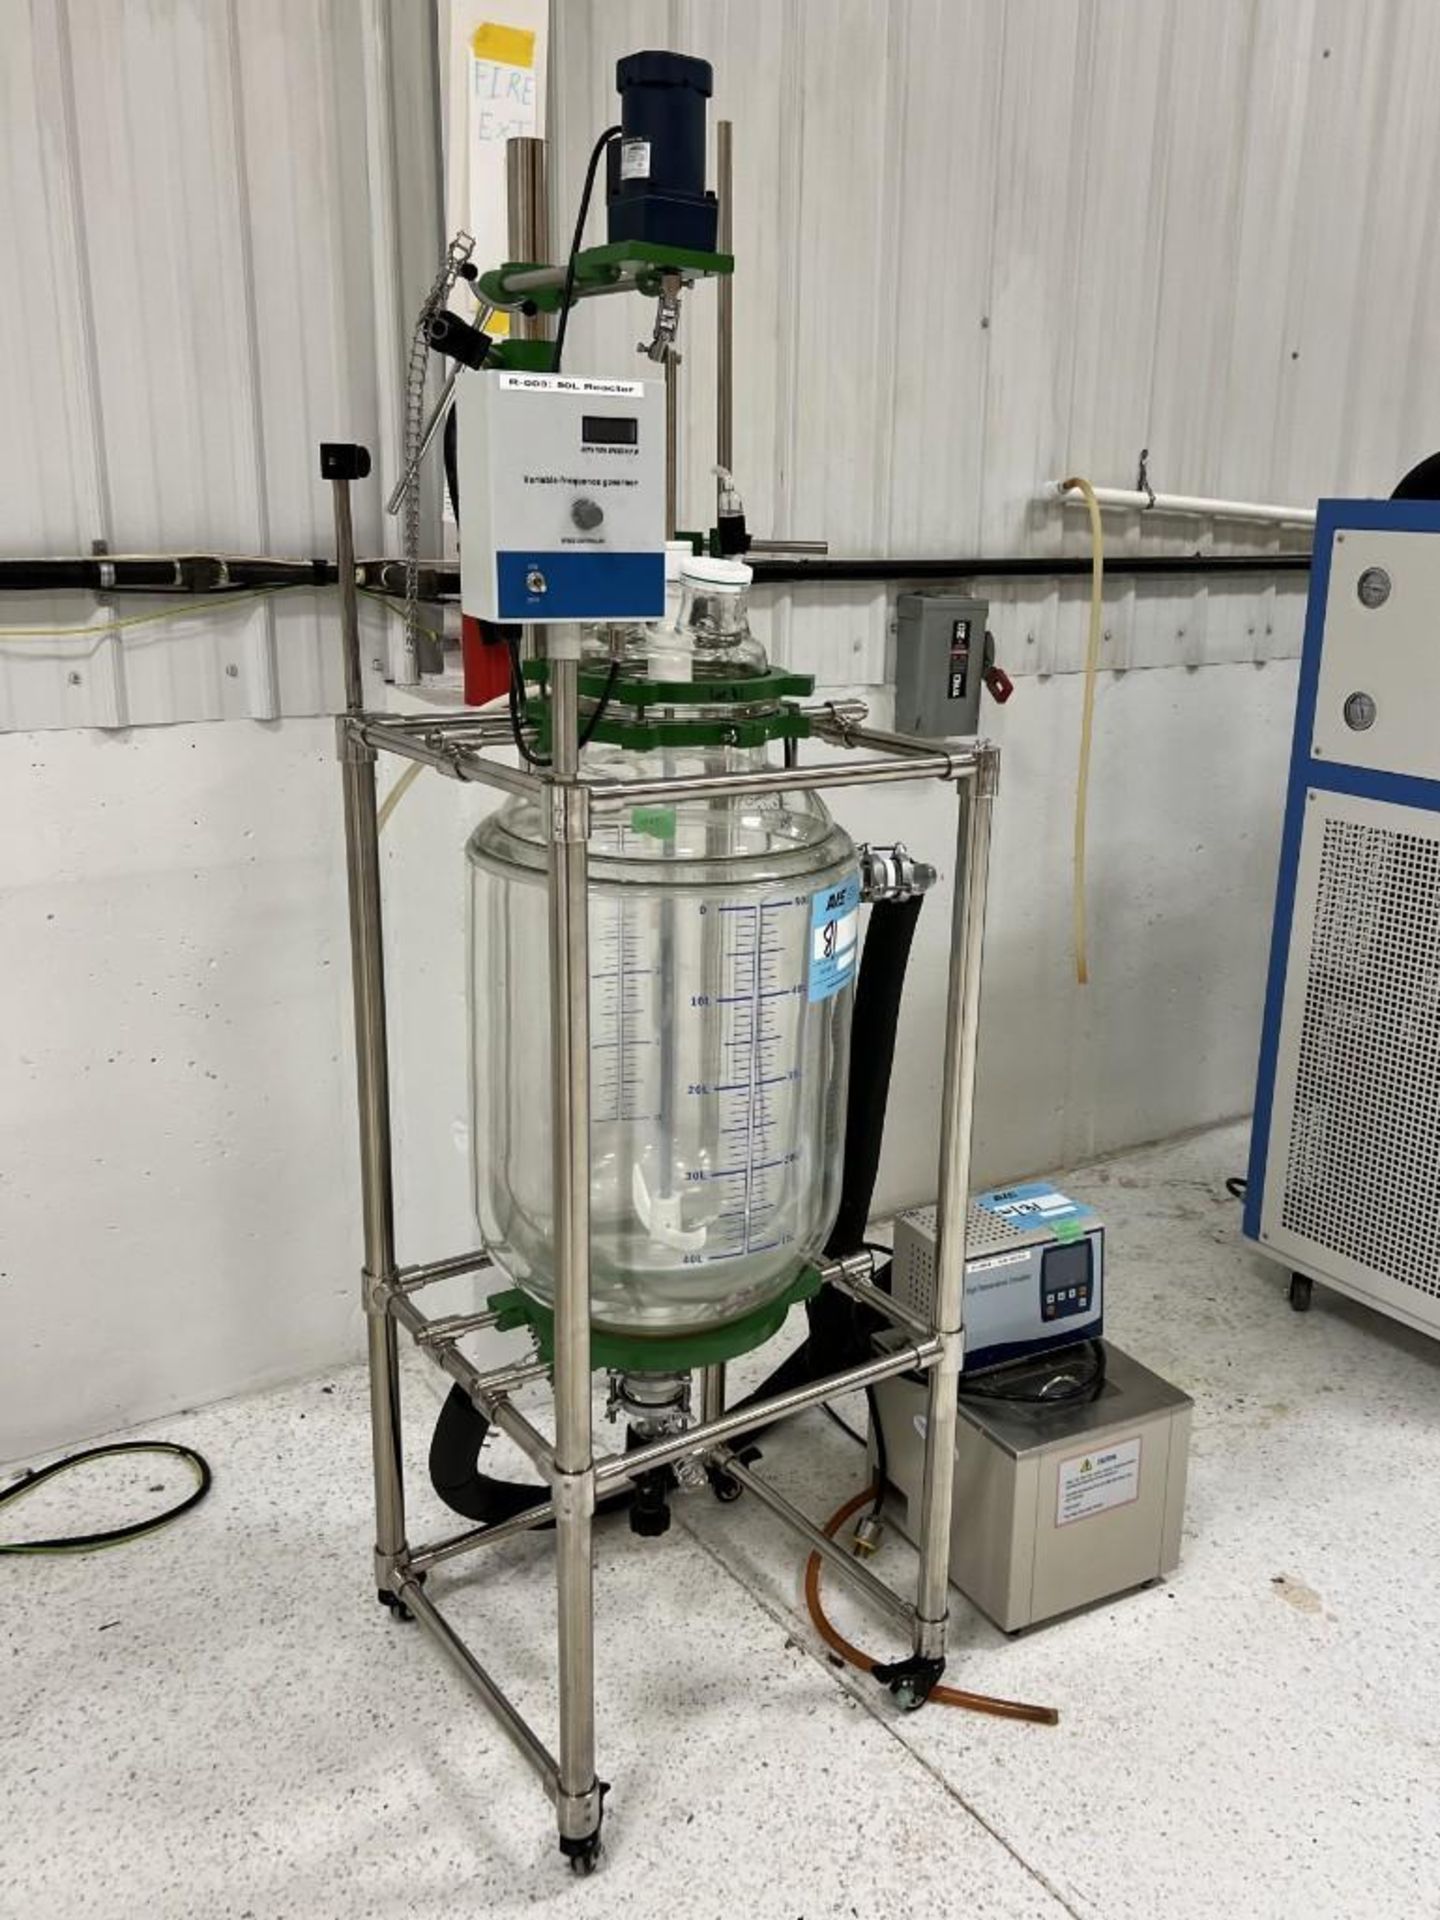 YHCHEM Jacketed Glass Reactor, Model JGR50L (D), Built 11/2019. With YHCHEM model YMD-150 heating ci - Image 2 of 9